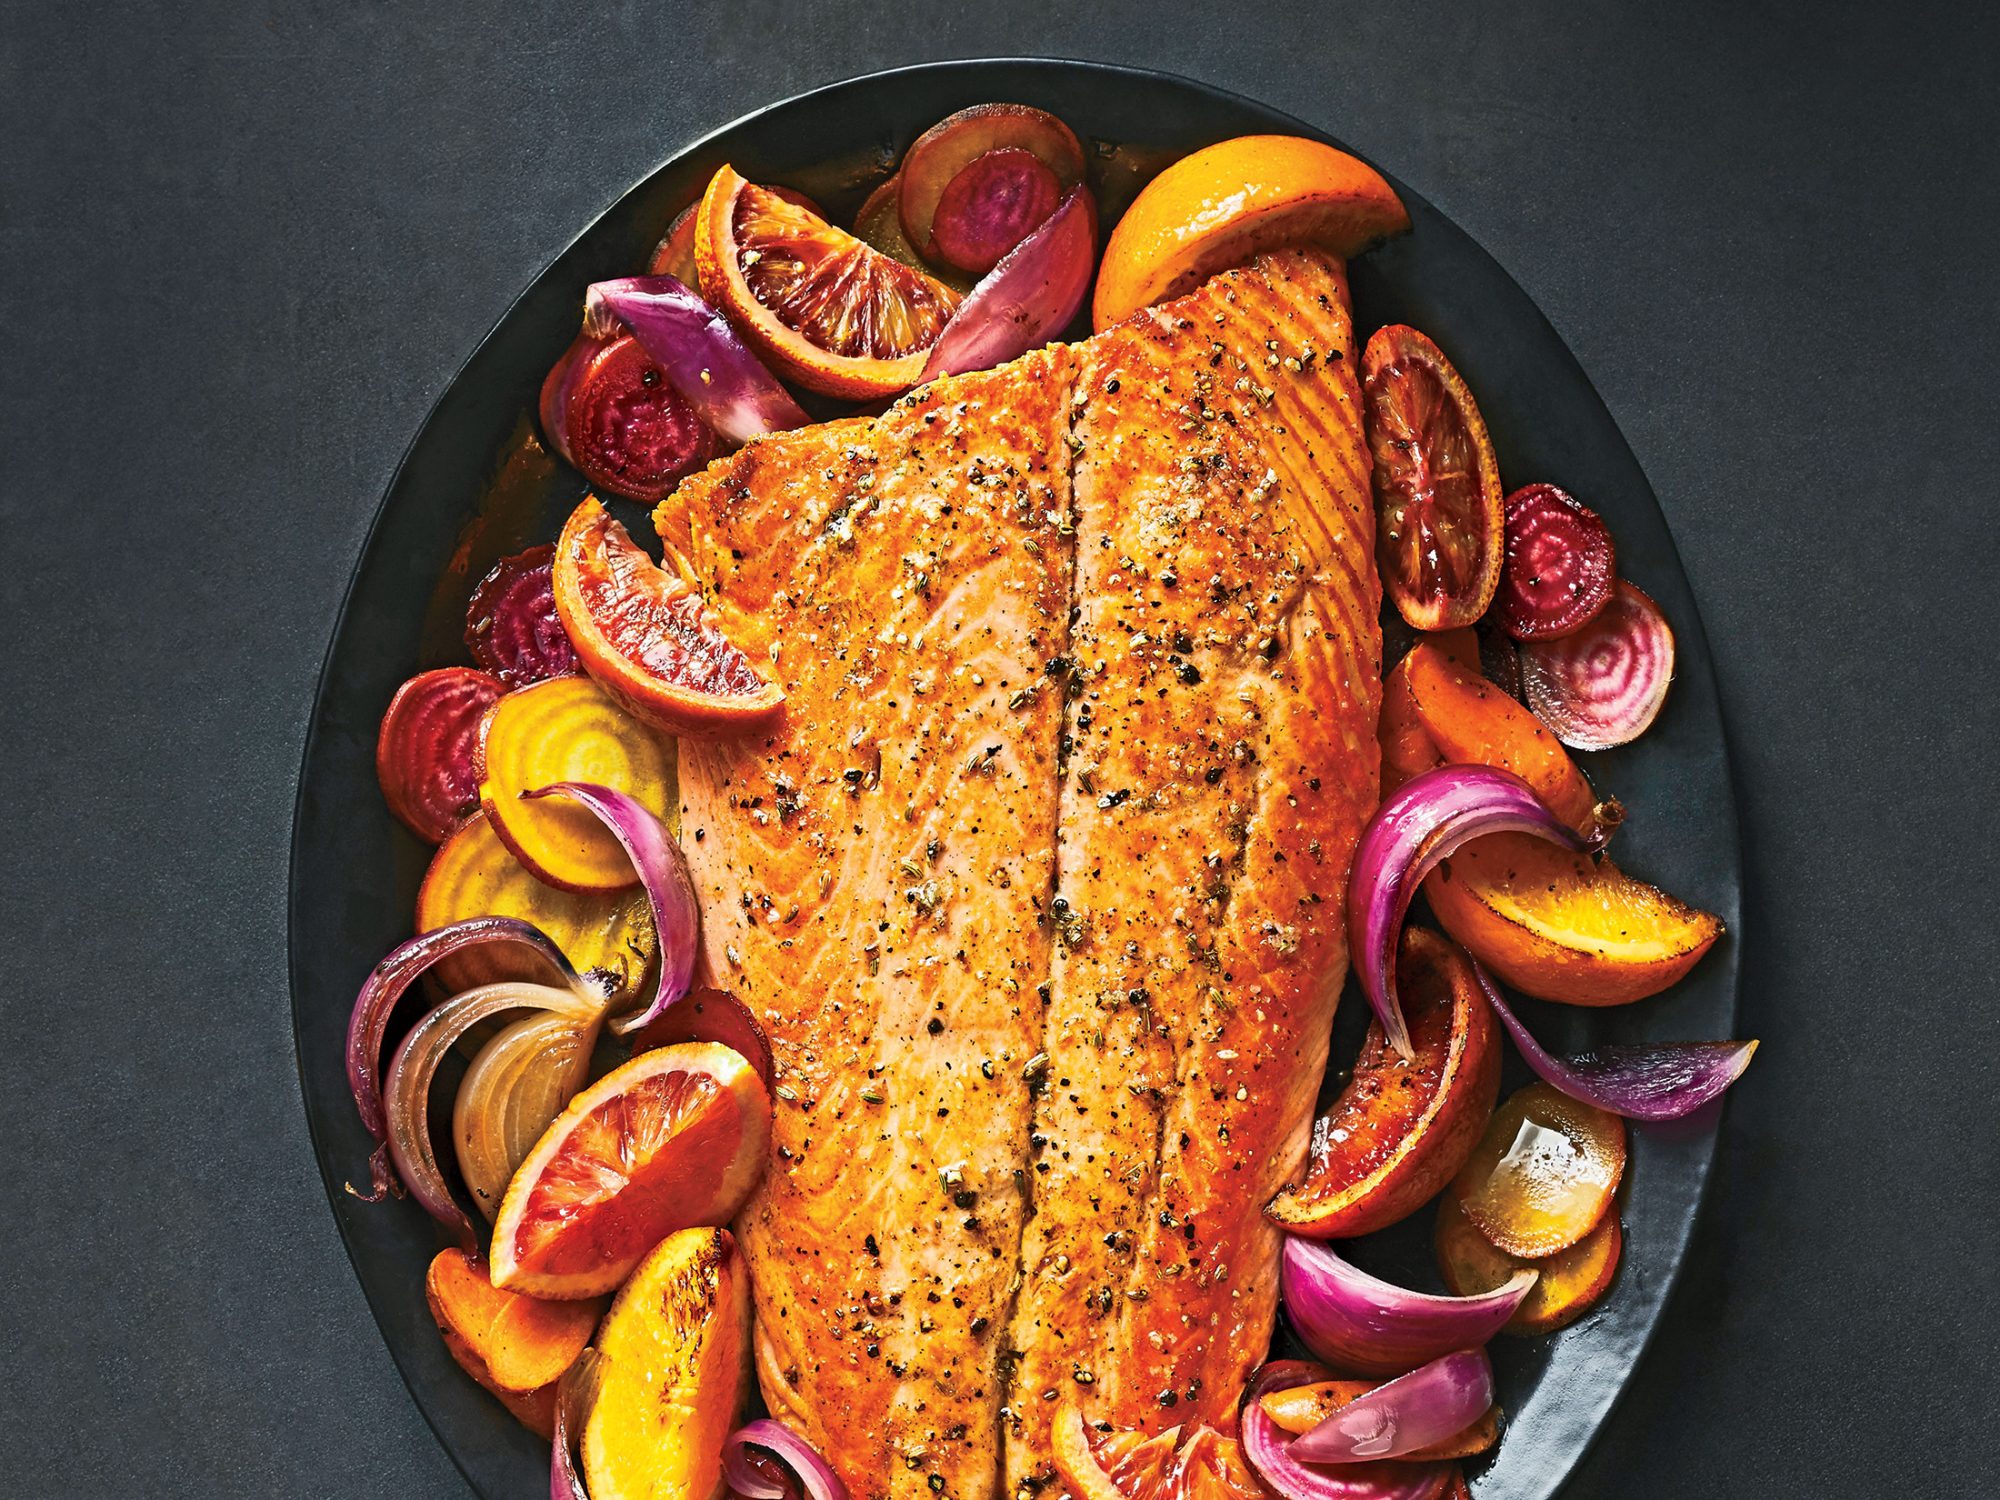 Roasted Salmon with Oranges, Beets, and Carrots